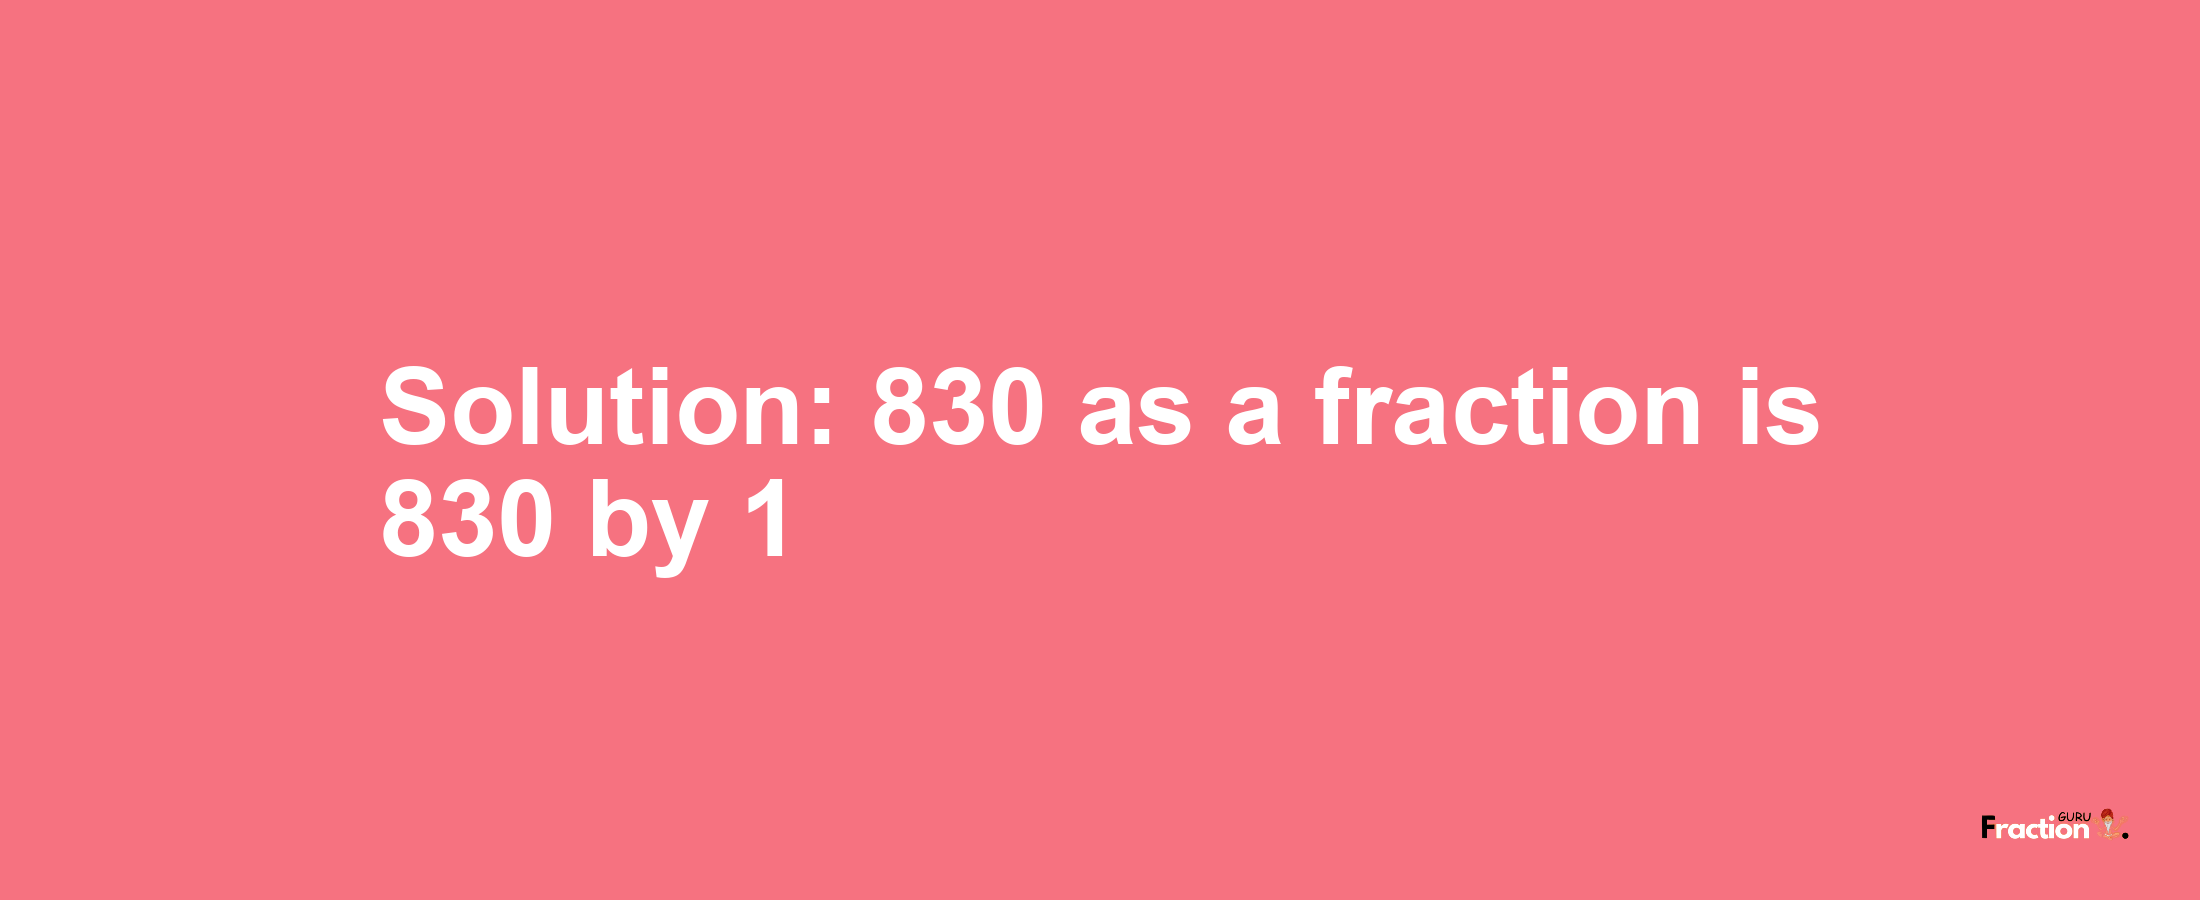 Solution:830 as a fraction is 830/1